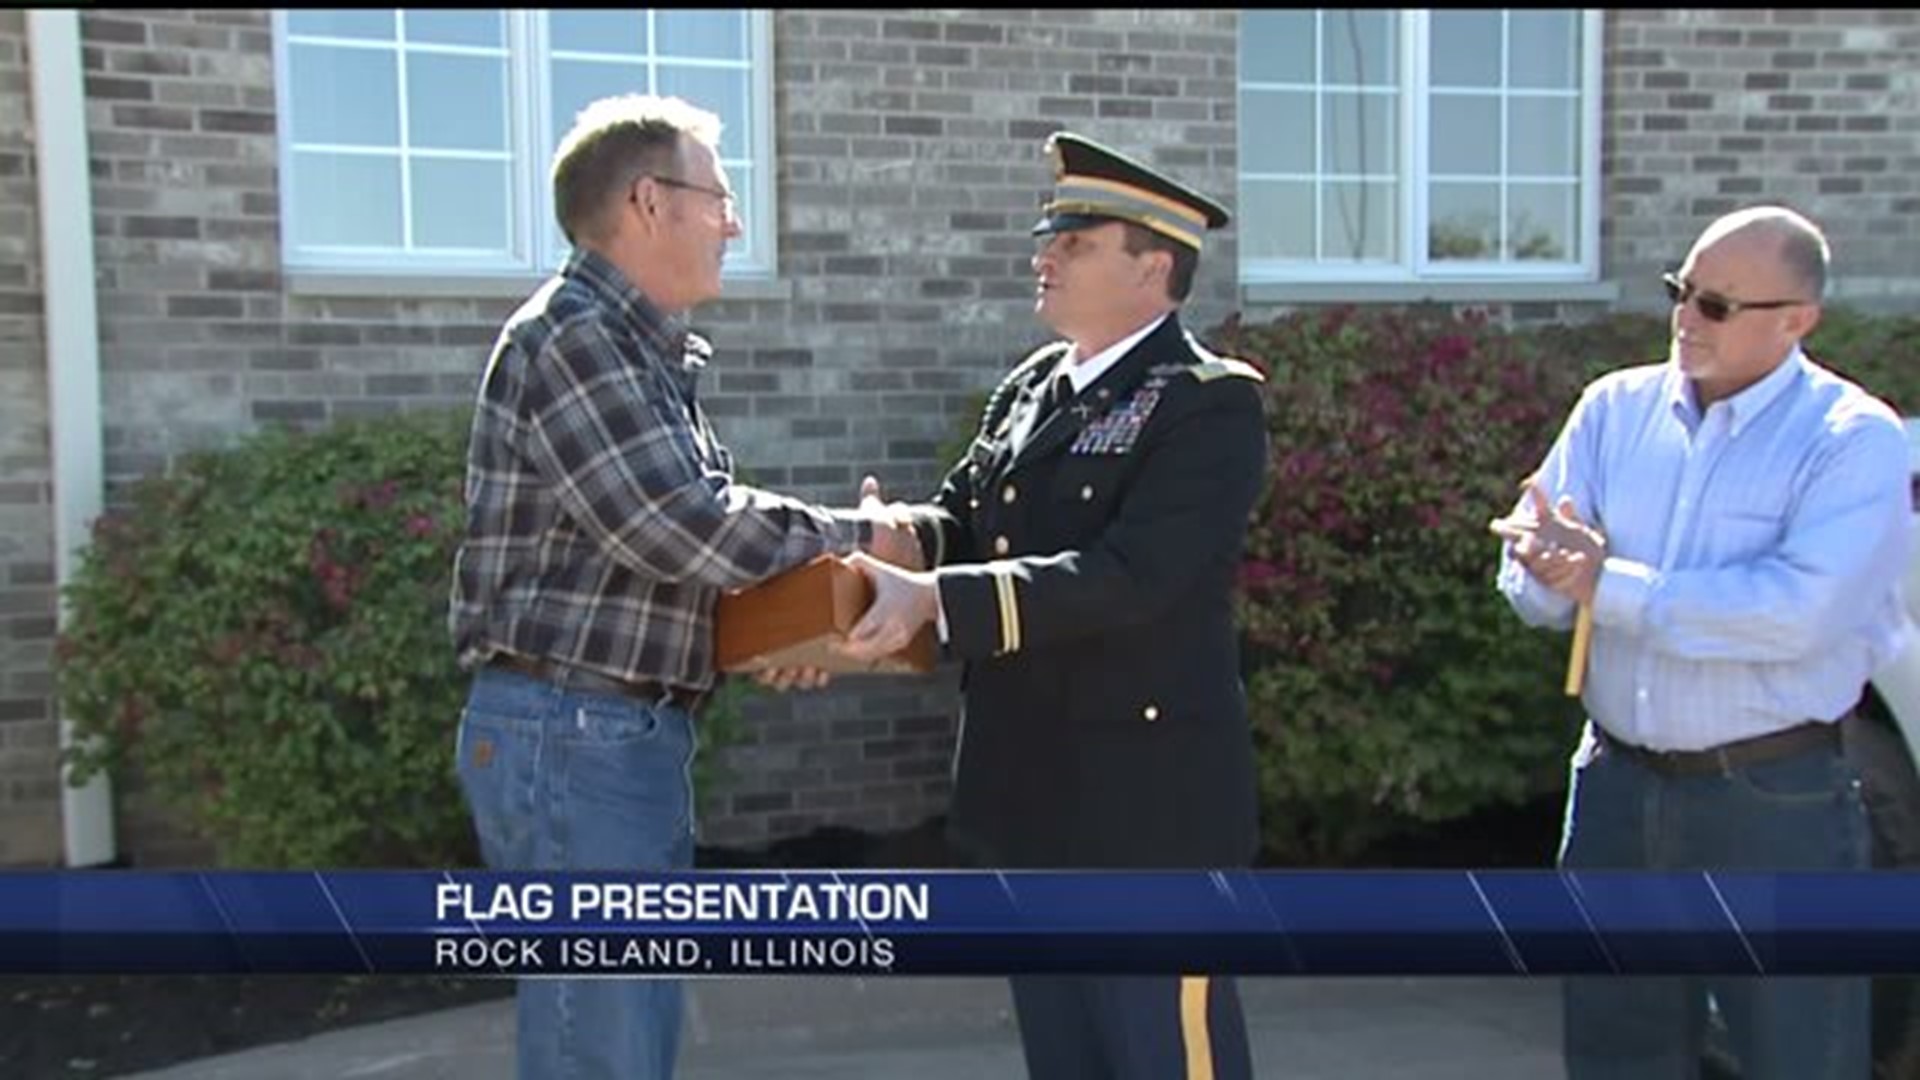 Flag presented to business owner